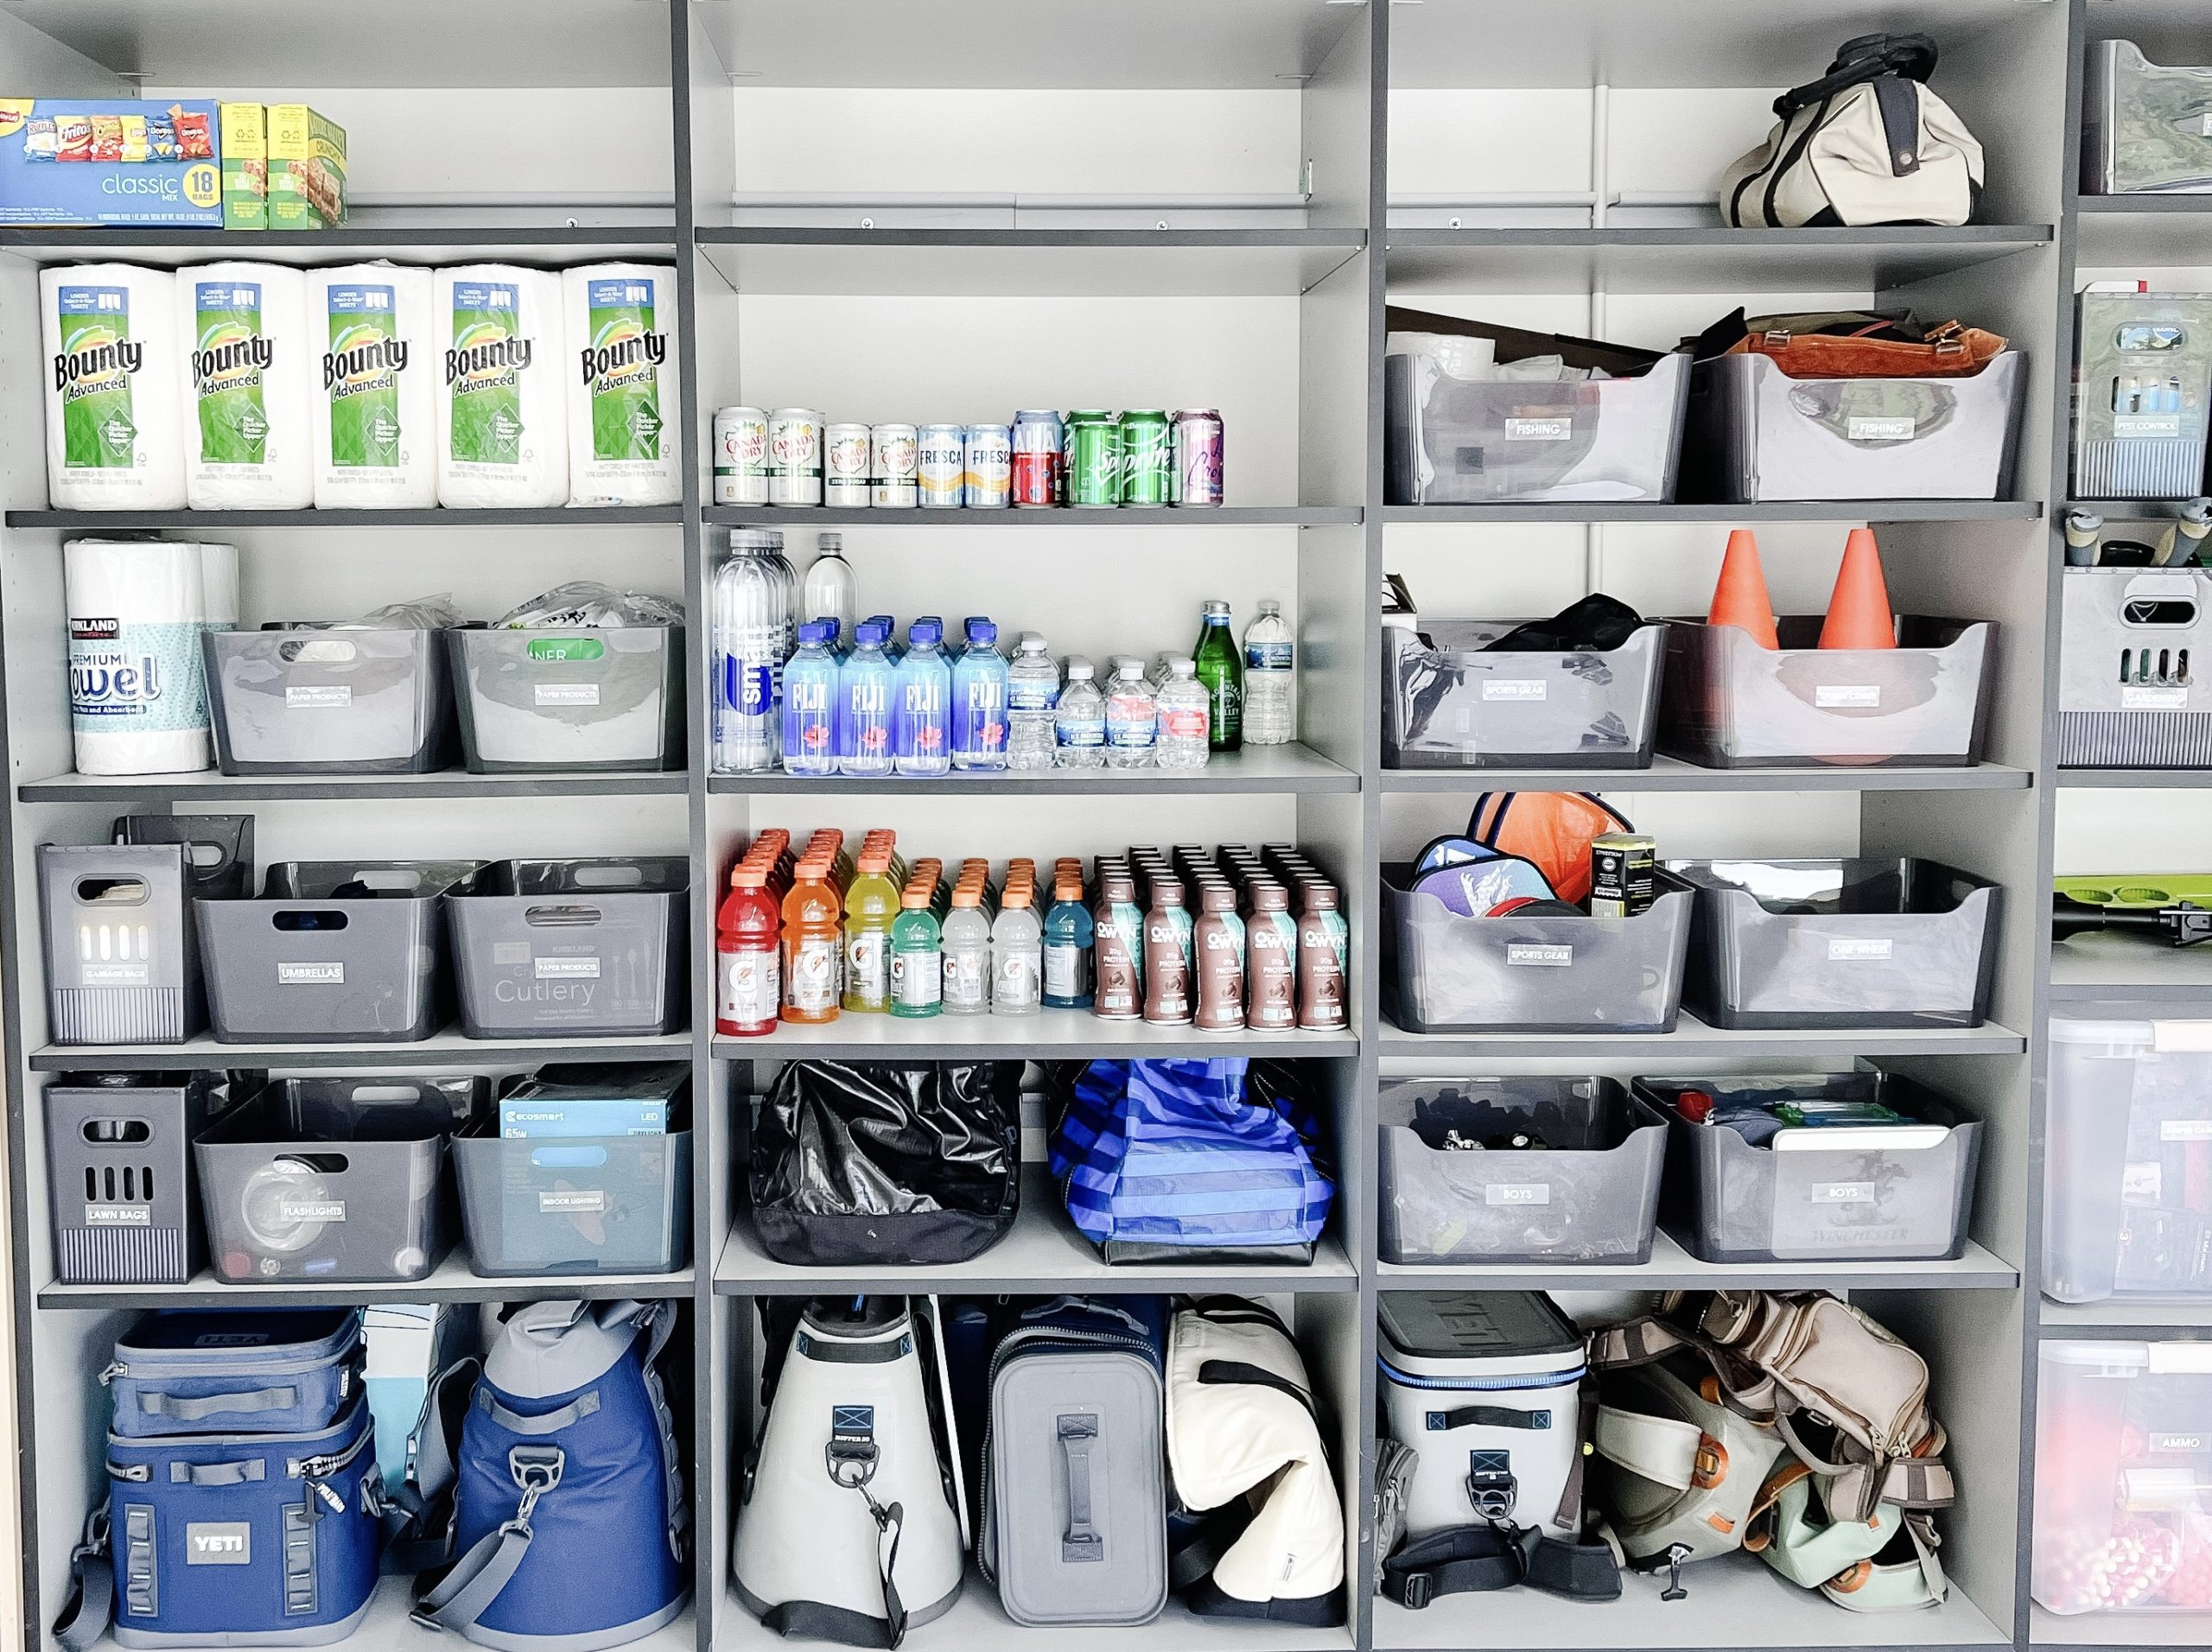 5 Reasons To Hire A Professional Home Organizer - Simply Southern